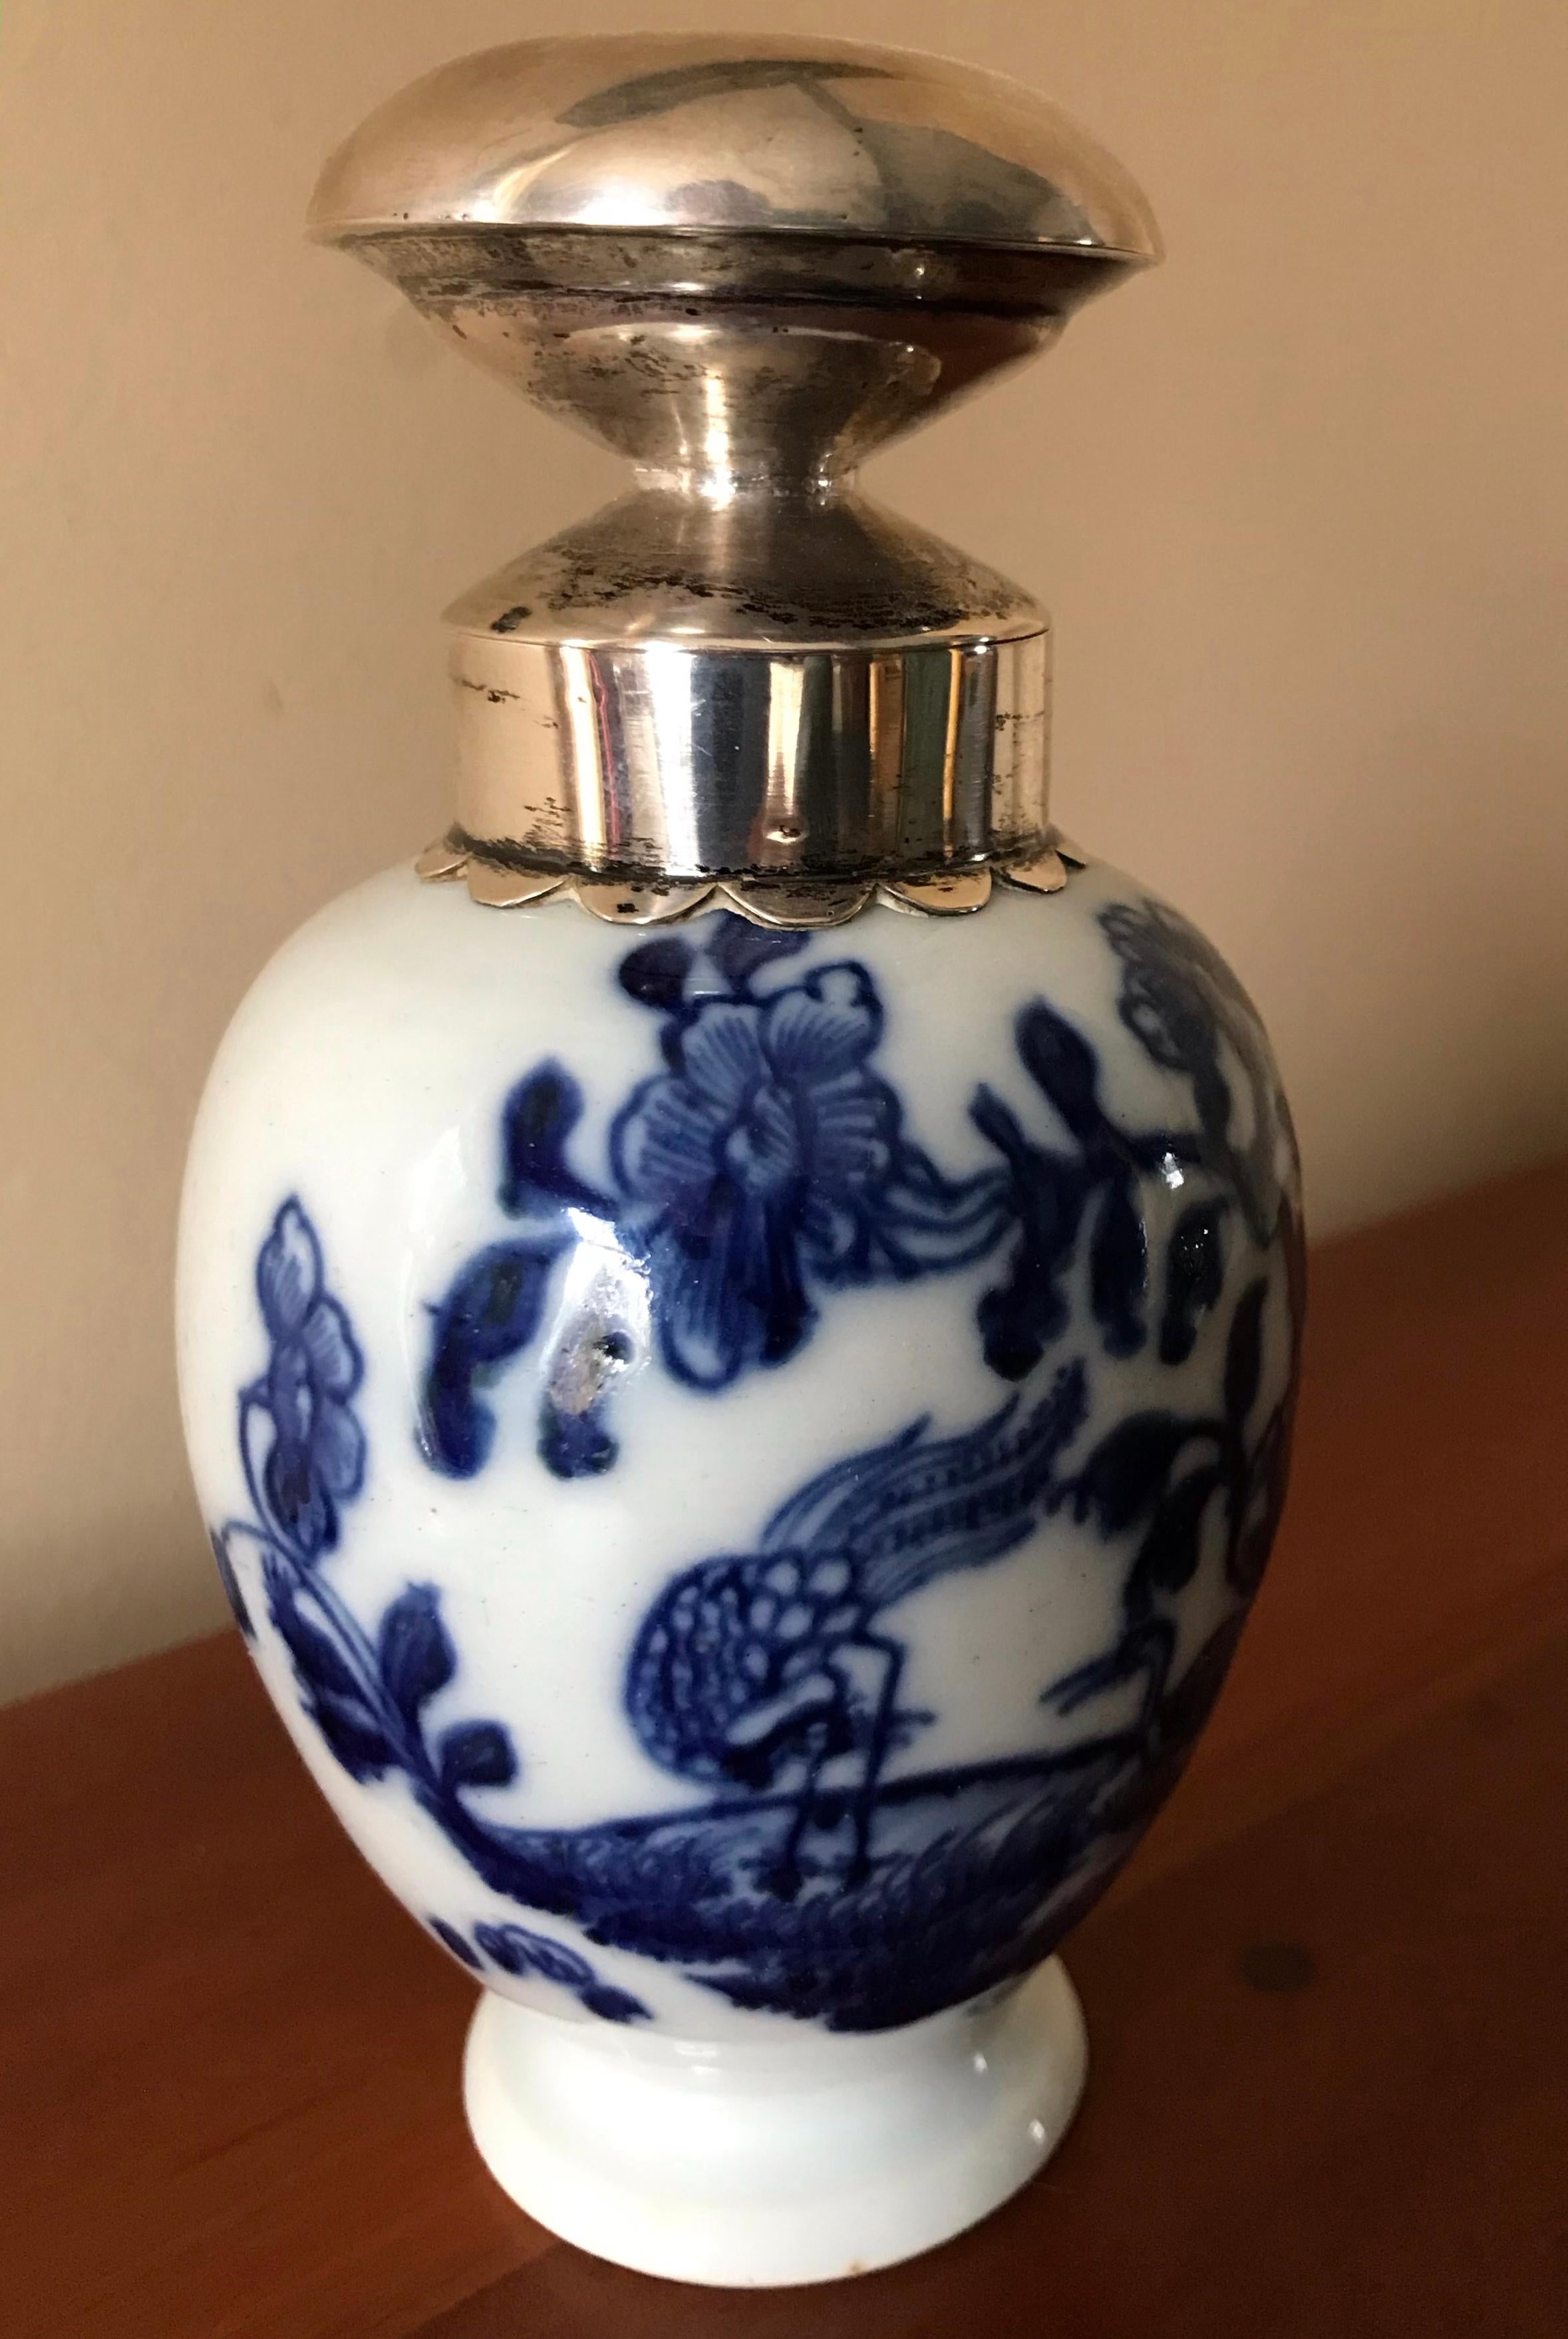 Blue and white Kang-xi tea caddy with silver stopper. Late 18th century Chinese tea caddy with cranes in landscape with floral sprigs. Dutch silver mounted collar and stopper. China, late 18th century. 
Dimensions: 5.5” H to top of stopper, 4 3/8”